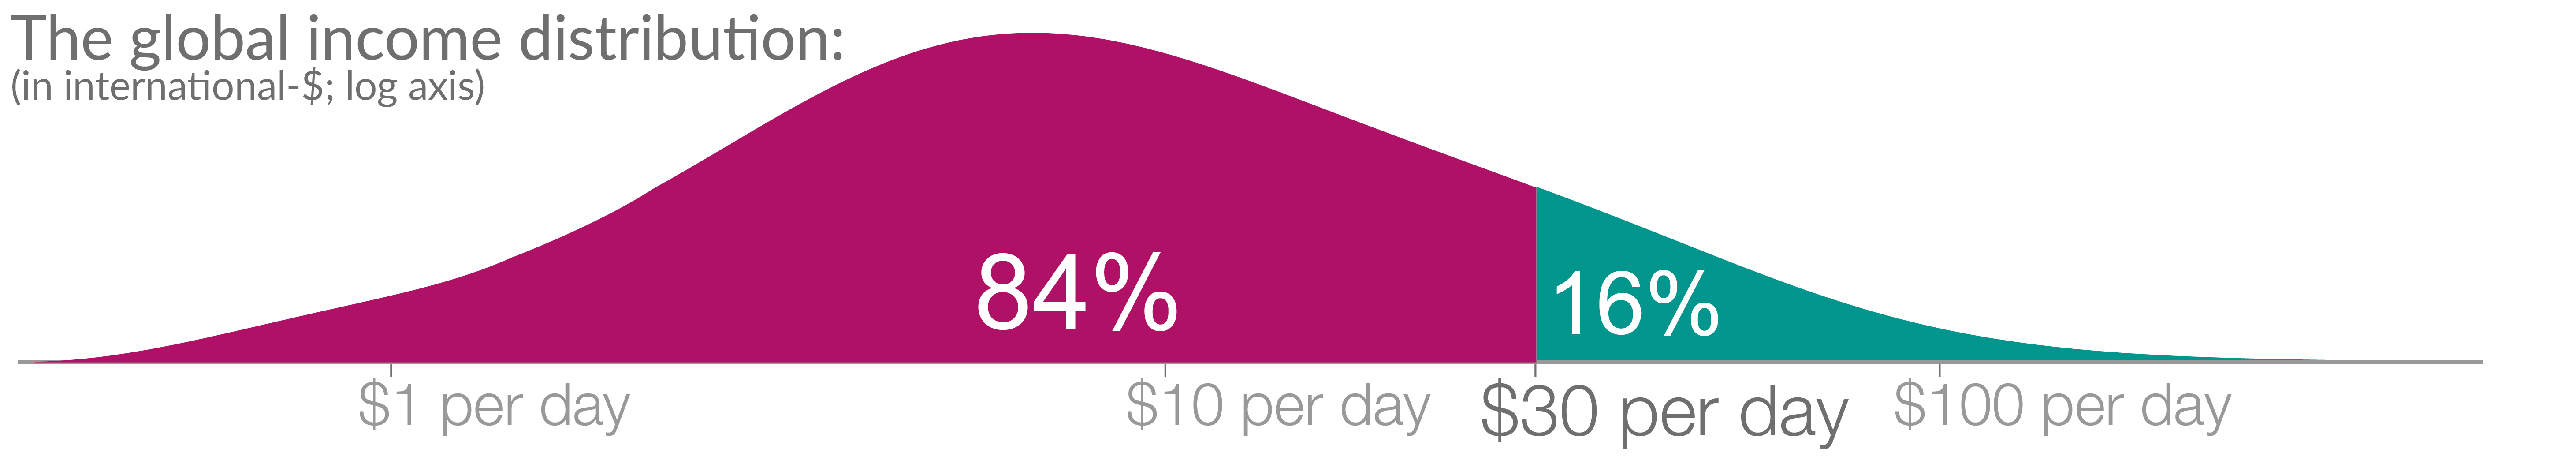 Showing the global income distribution and highlighting that 84% are living below $30 per day